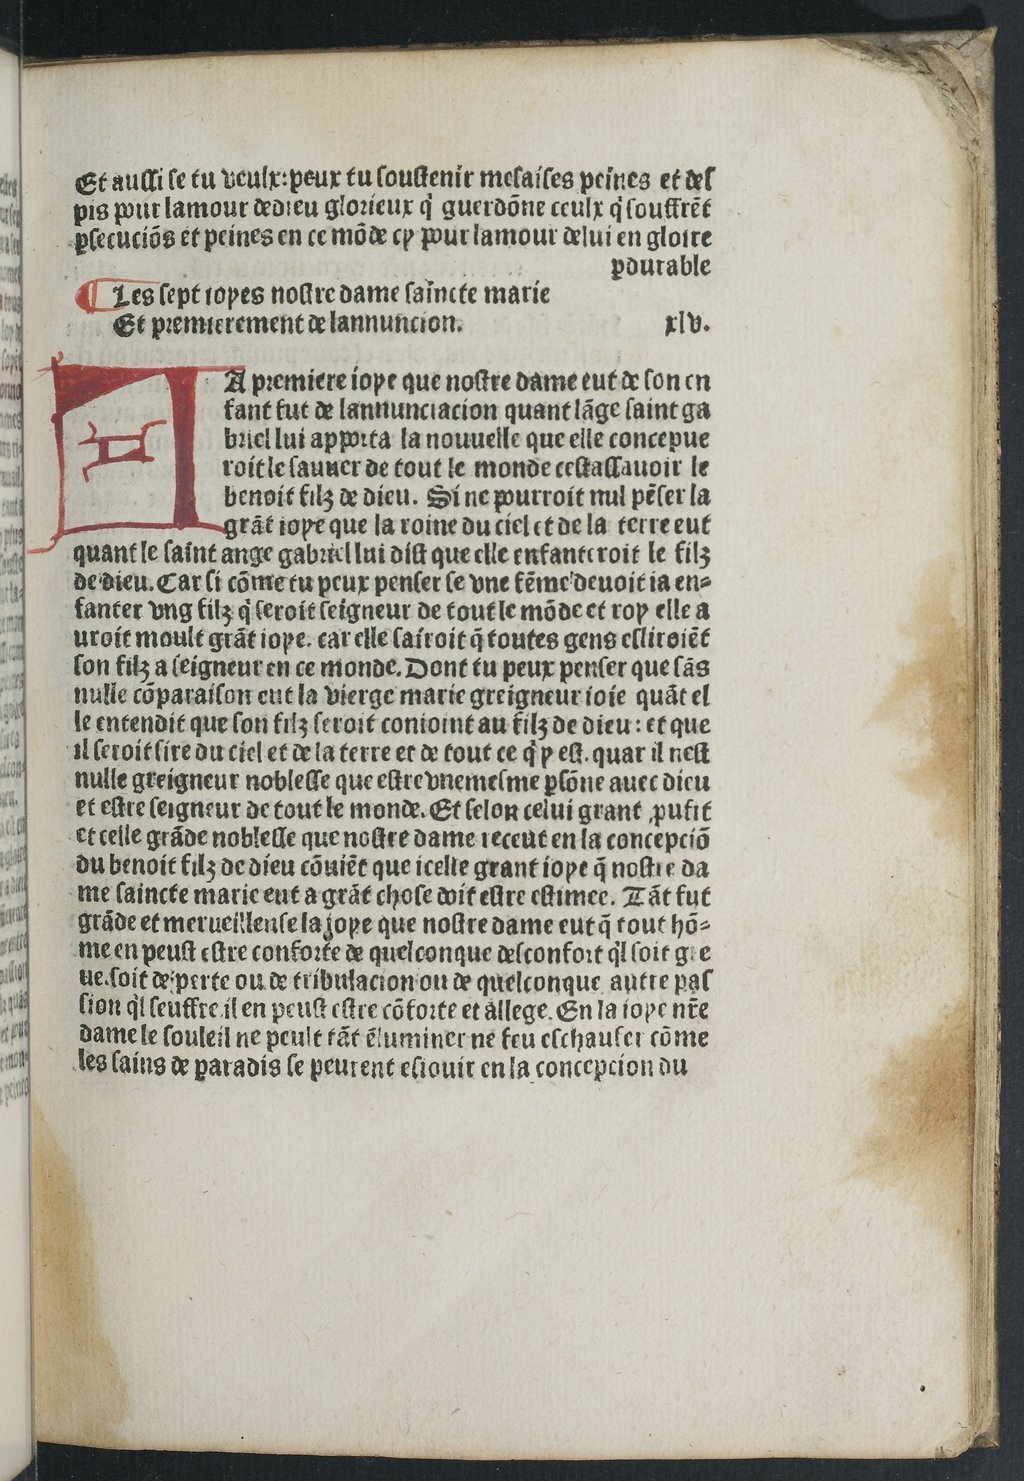 1482 [Antoine Caillaut] Trésor des humains BnF_Page_063.jpg